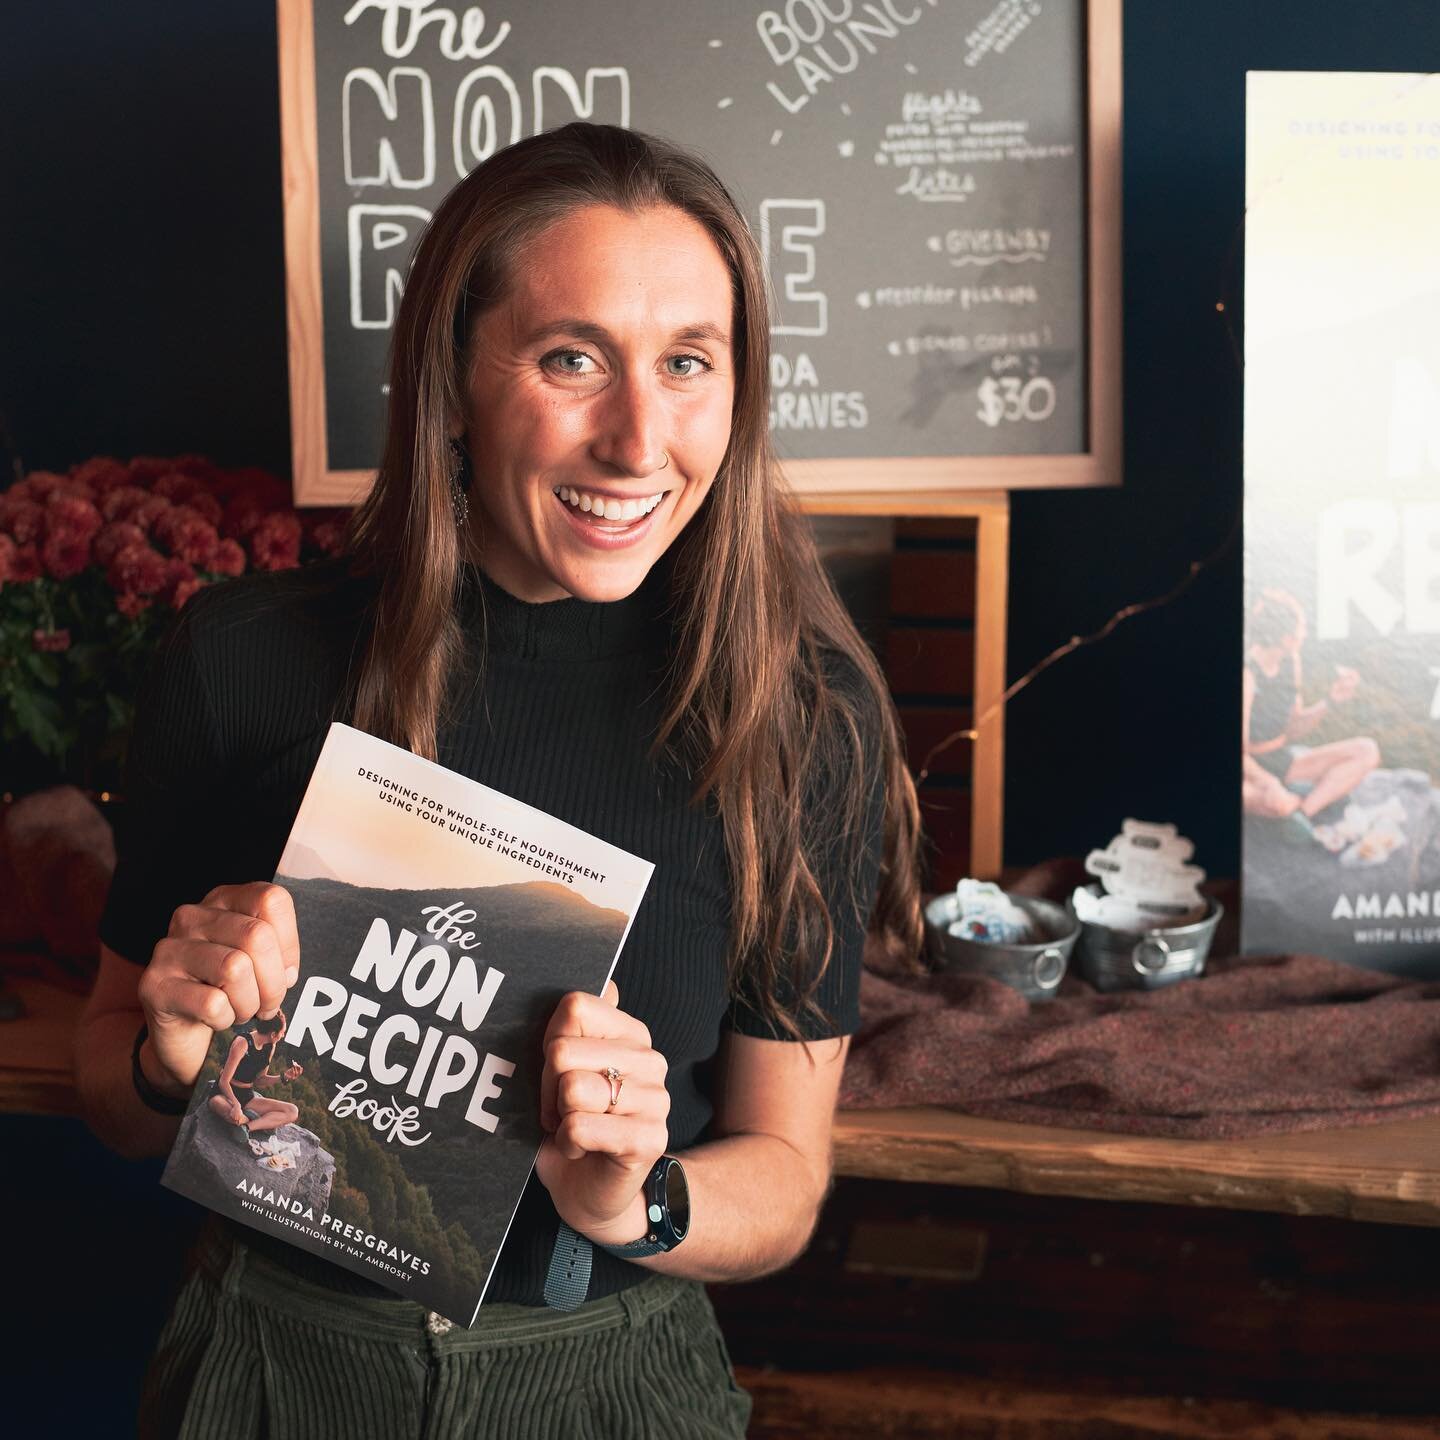 @amandapresgraves wrote a book and you can now buy it! @thenonrecipebook